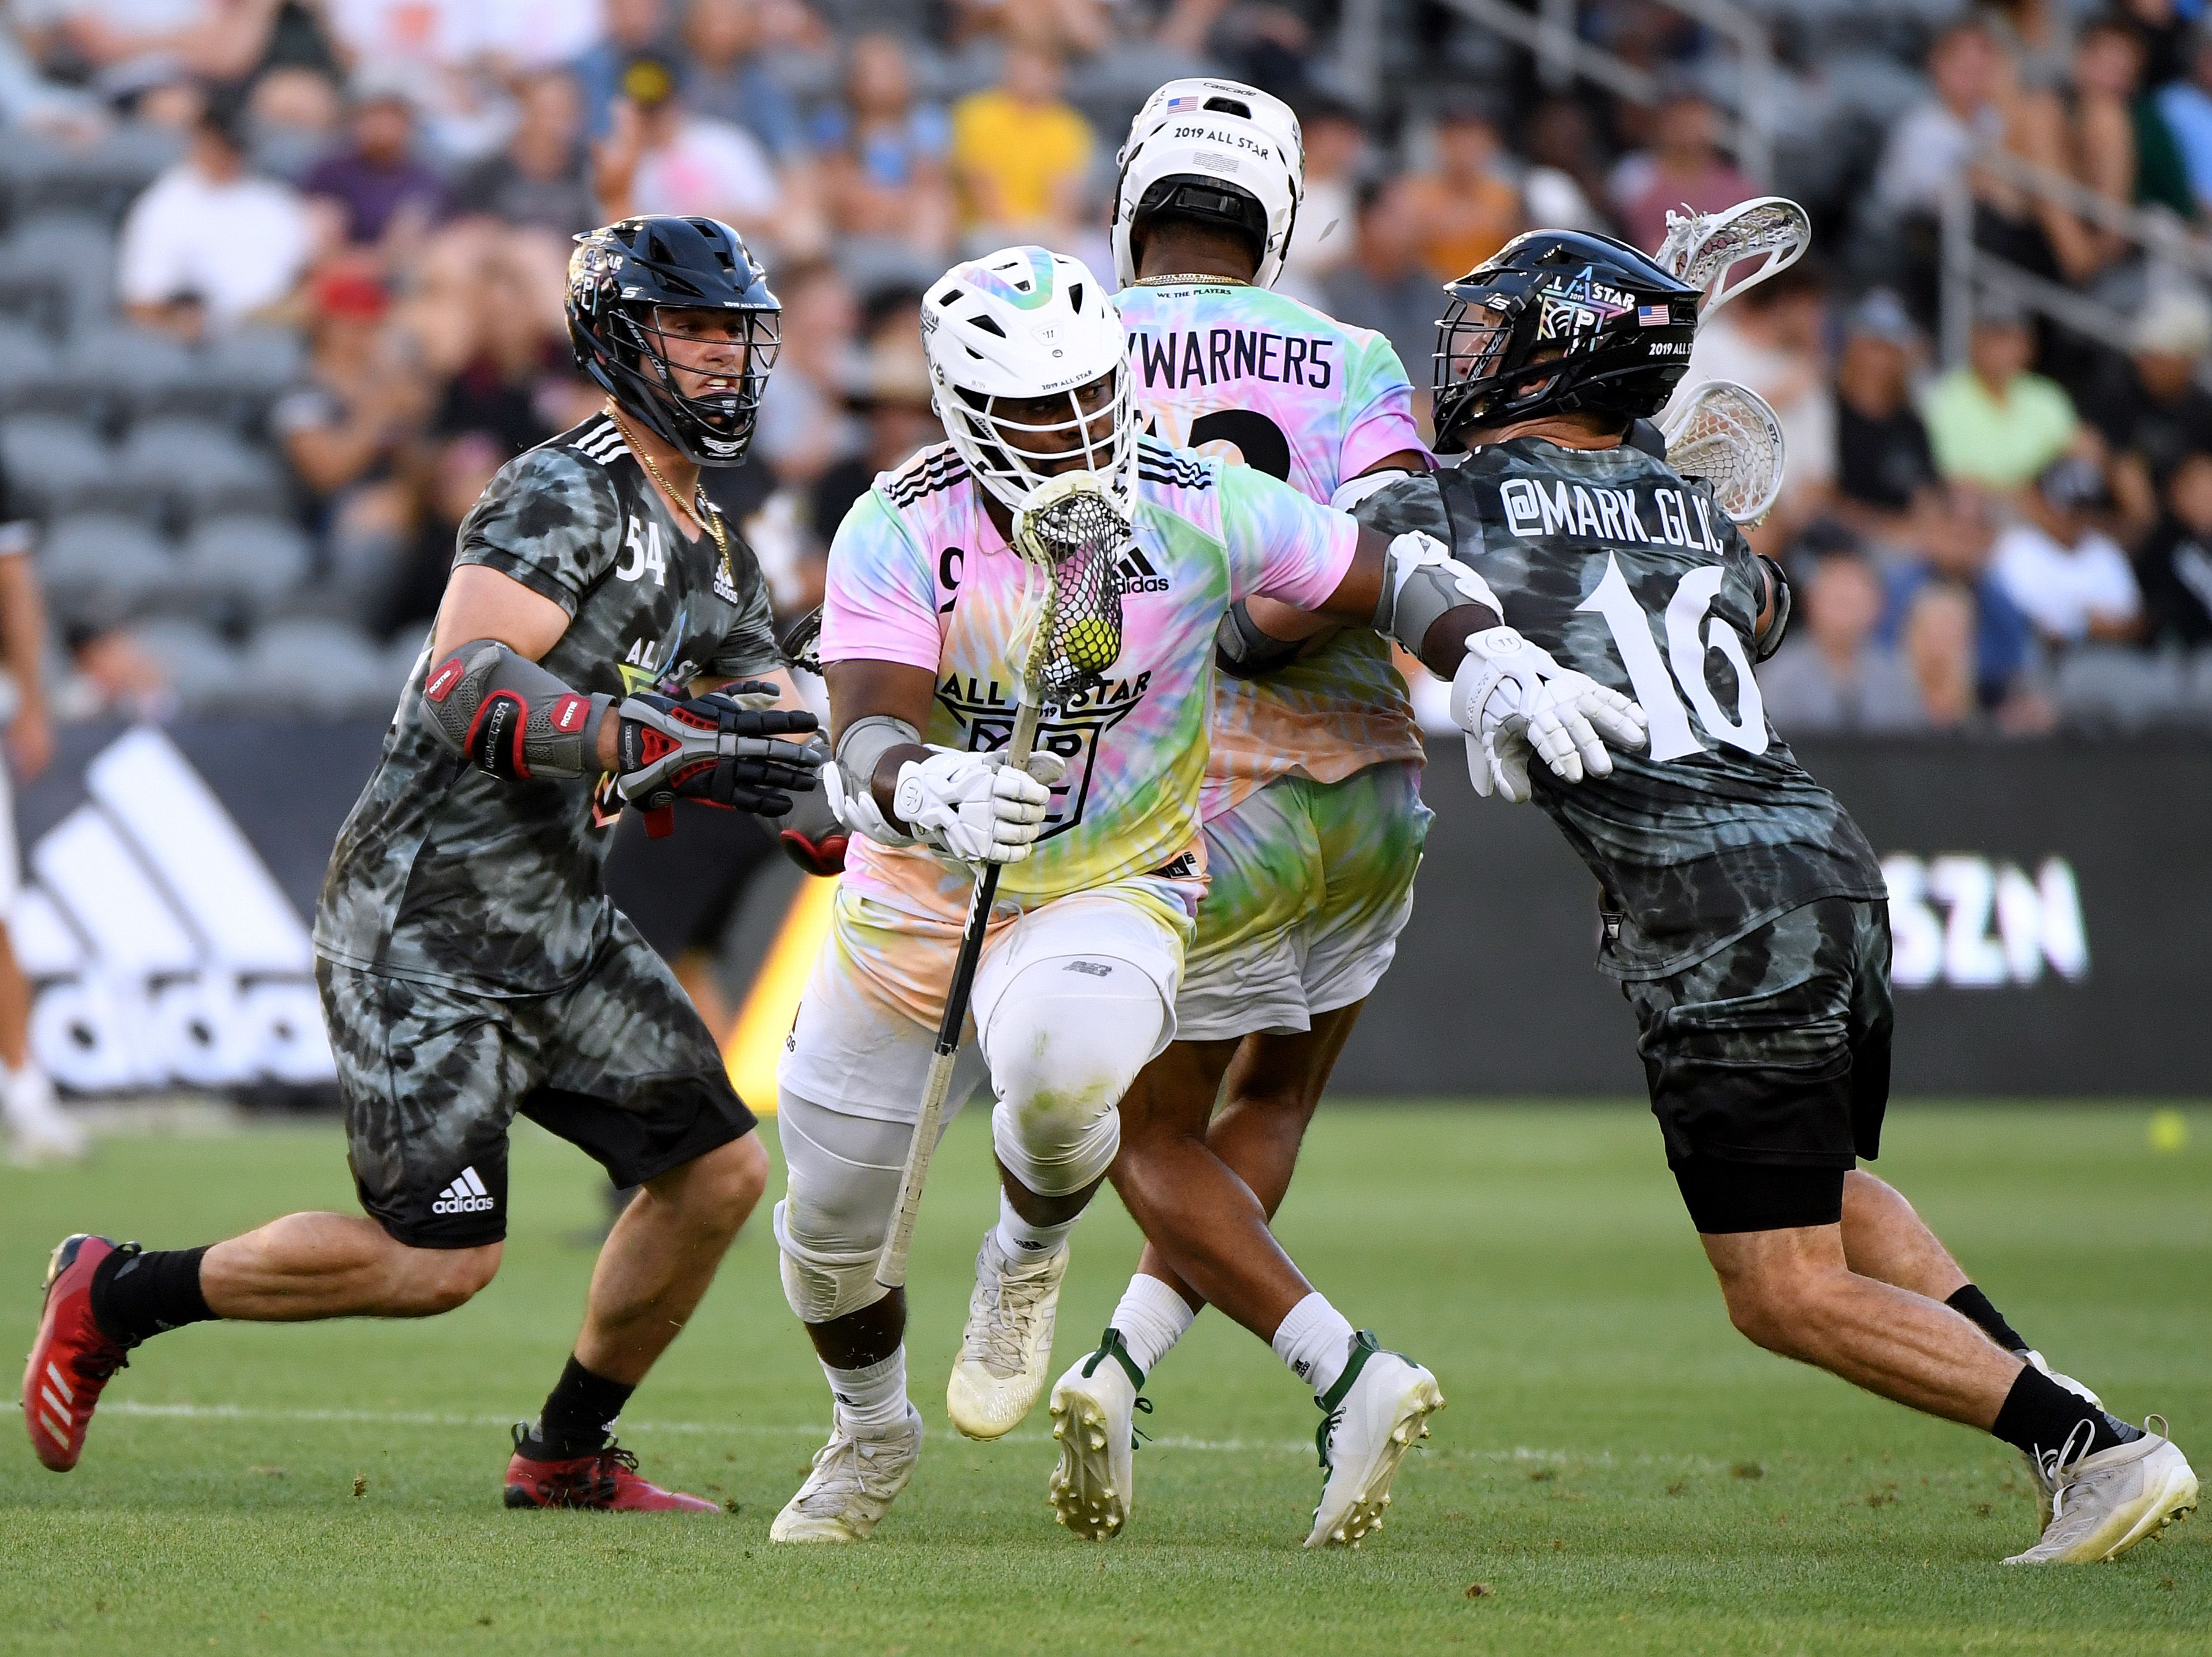 Premier Lacrosse to hold all-star game at Gillette Stadium - The